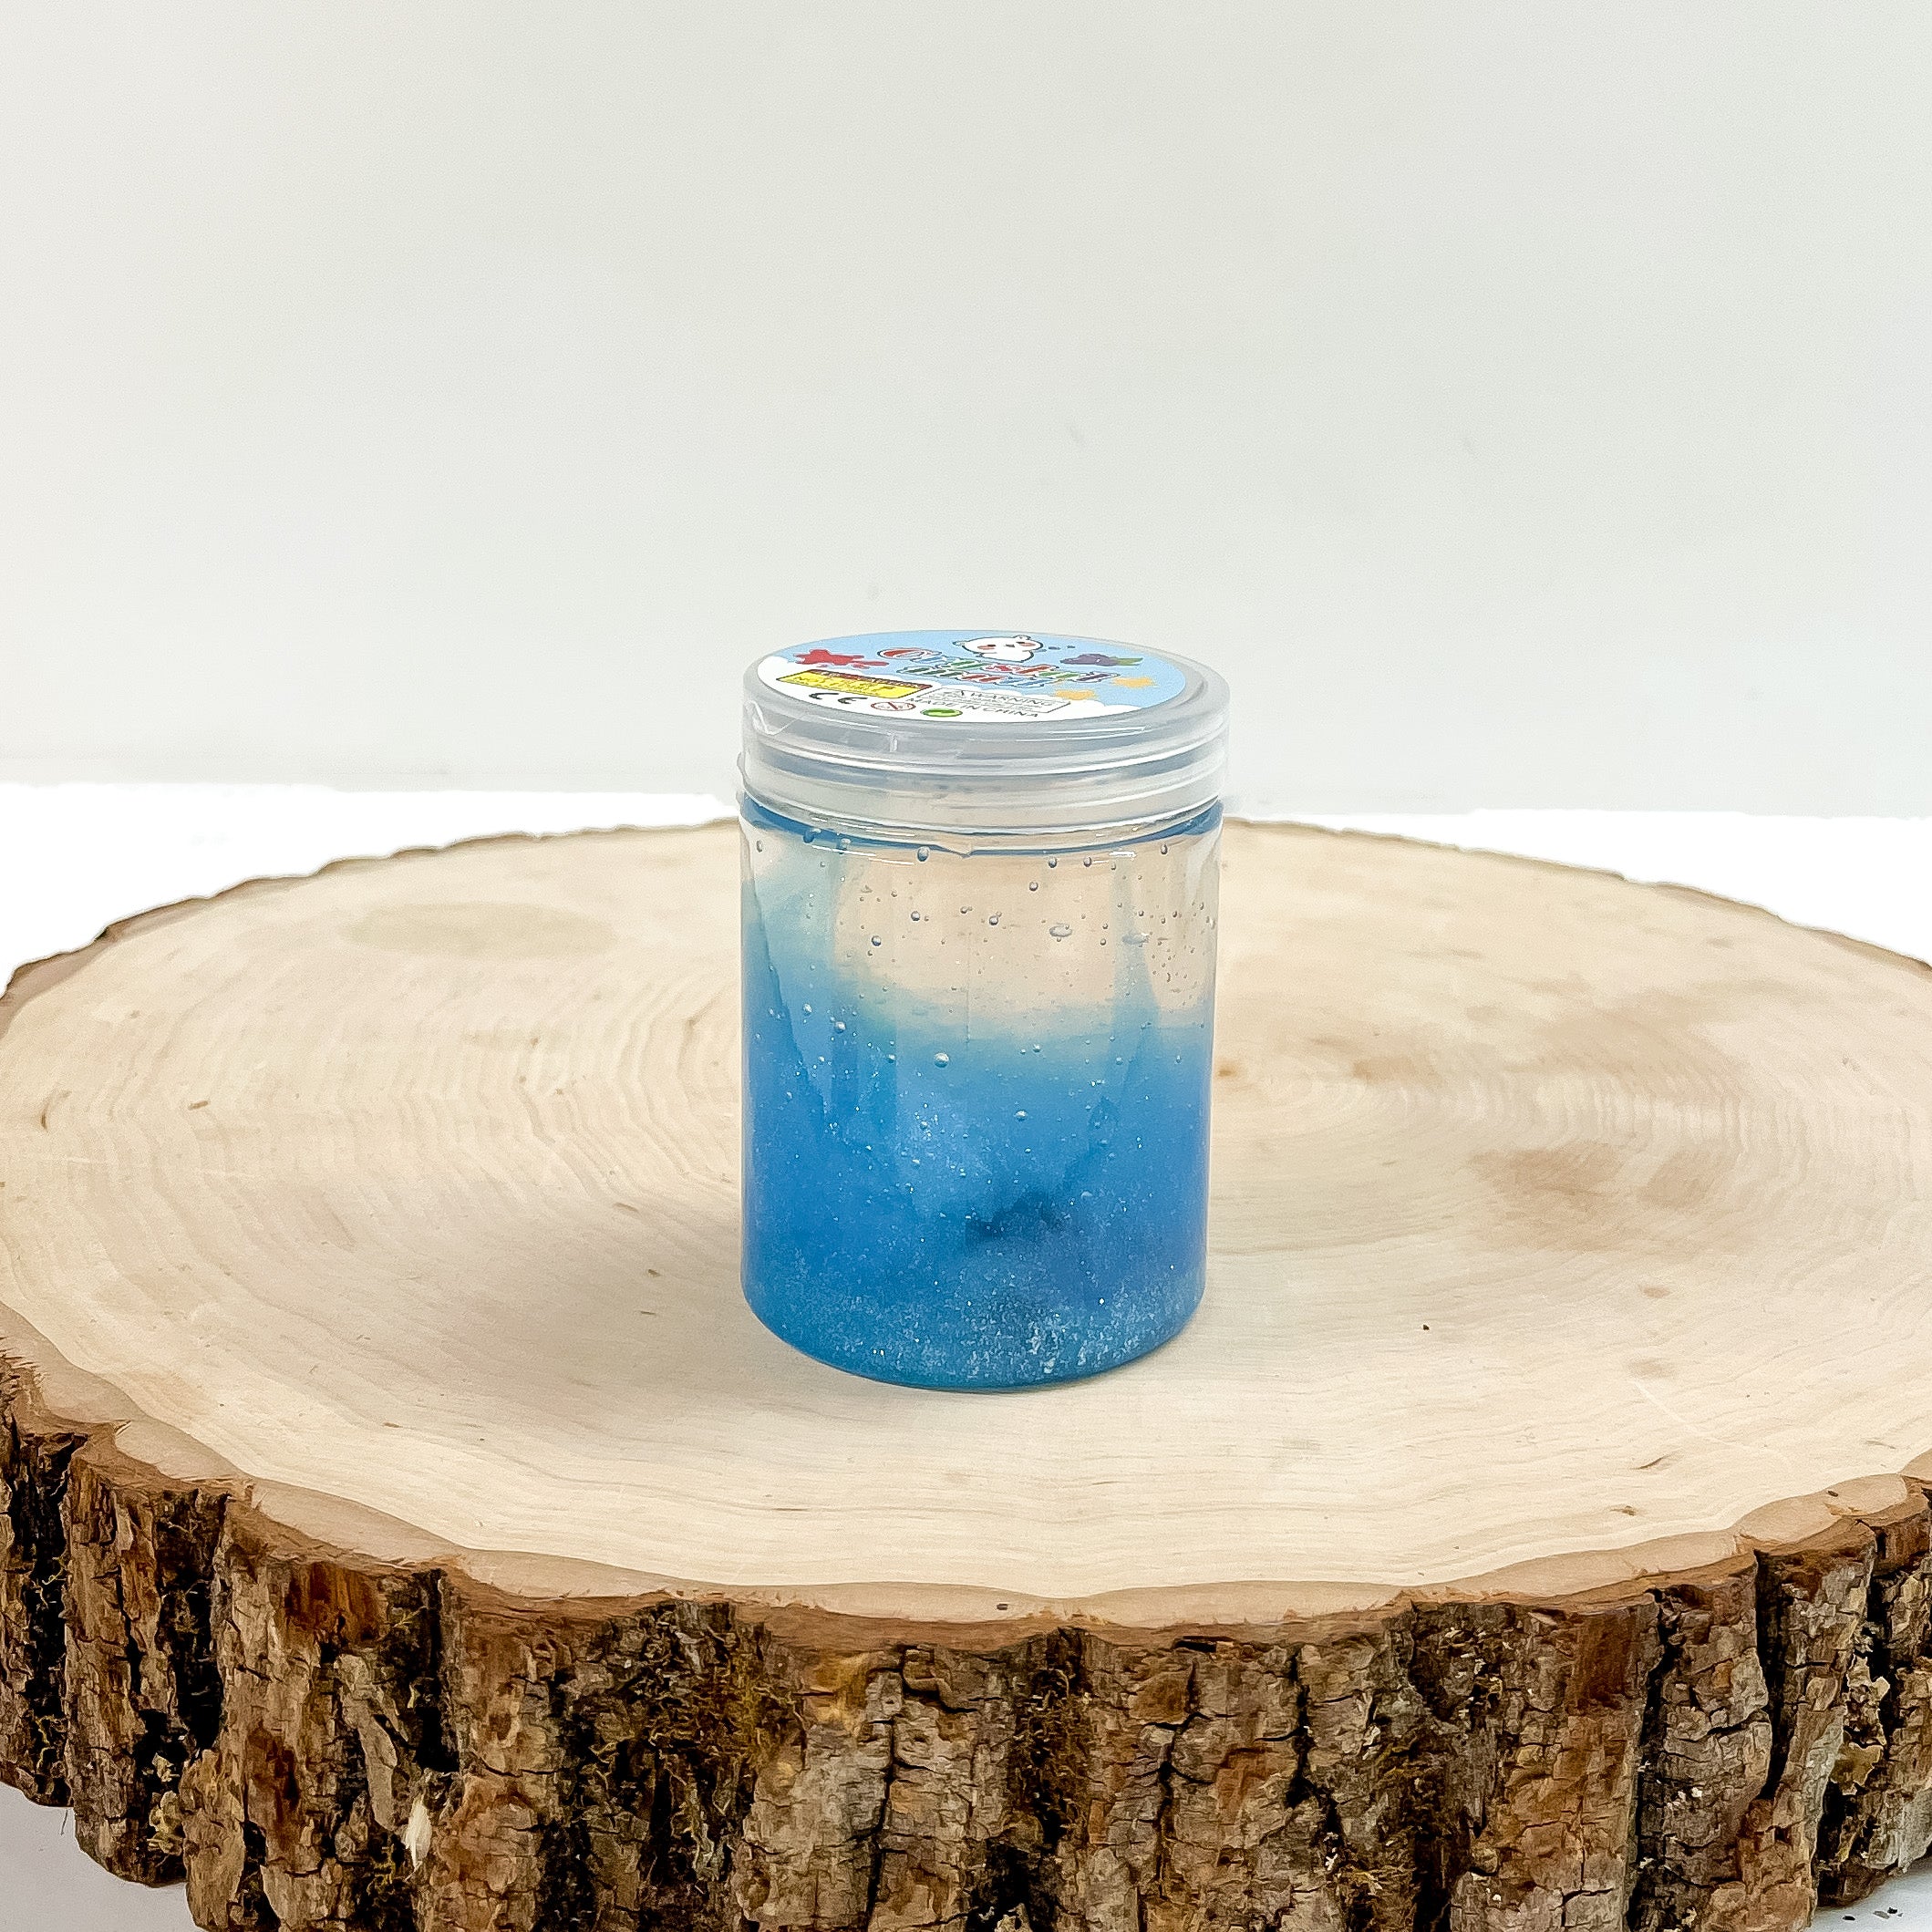 This is a clear slime with blue glitter, this container is taken on a slab of  wood and on a white background.